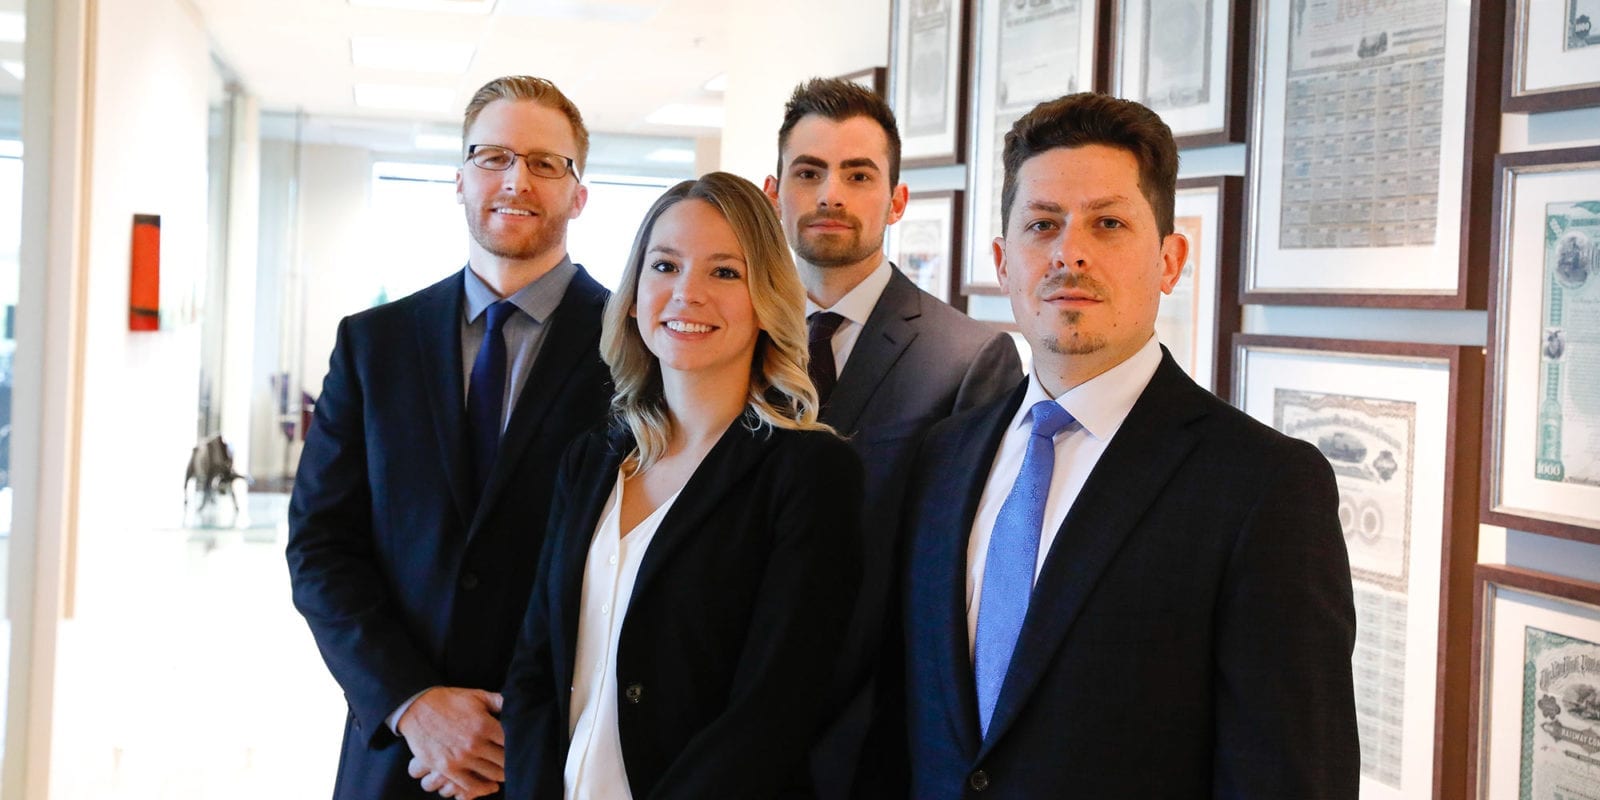 Investment Counsel Company Research and Trading Team Andrew Smith, Tiffany Emerson, Aaron Cajka and Brett Myer